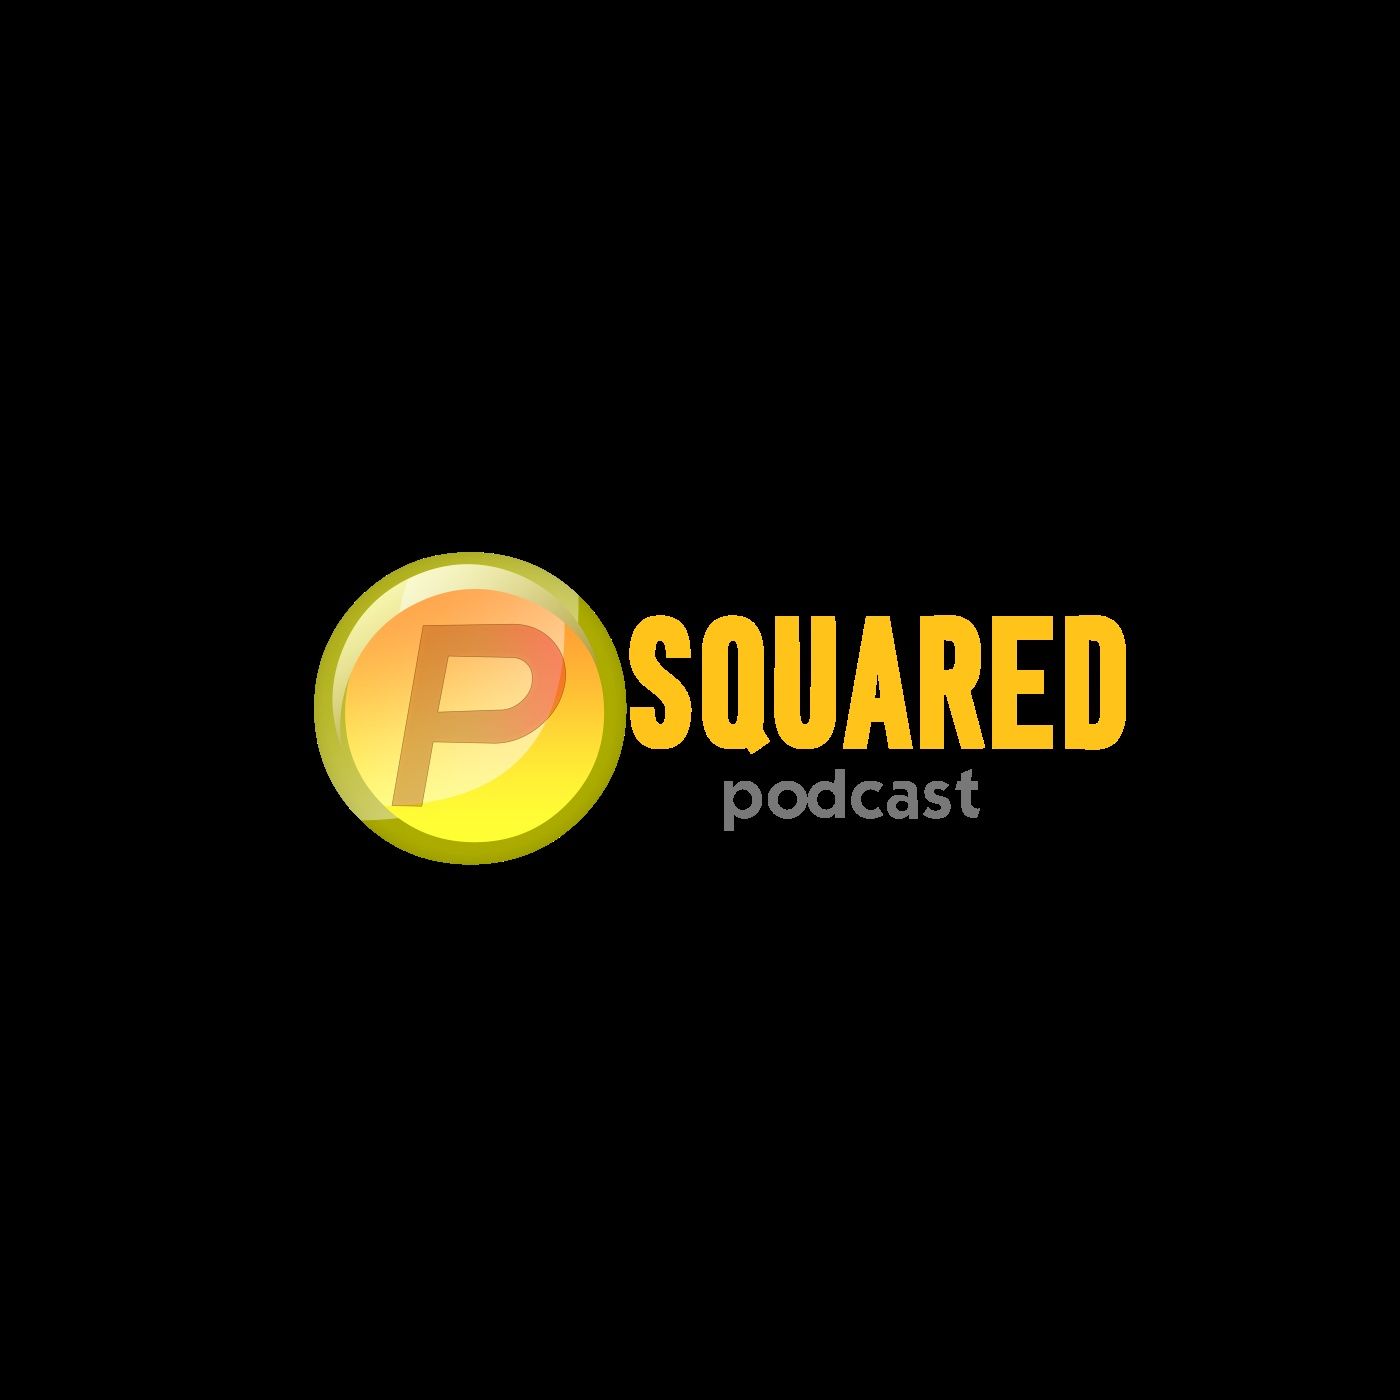 P Squared Podcast Episode #26 - The Gesture